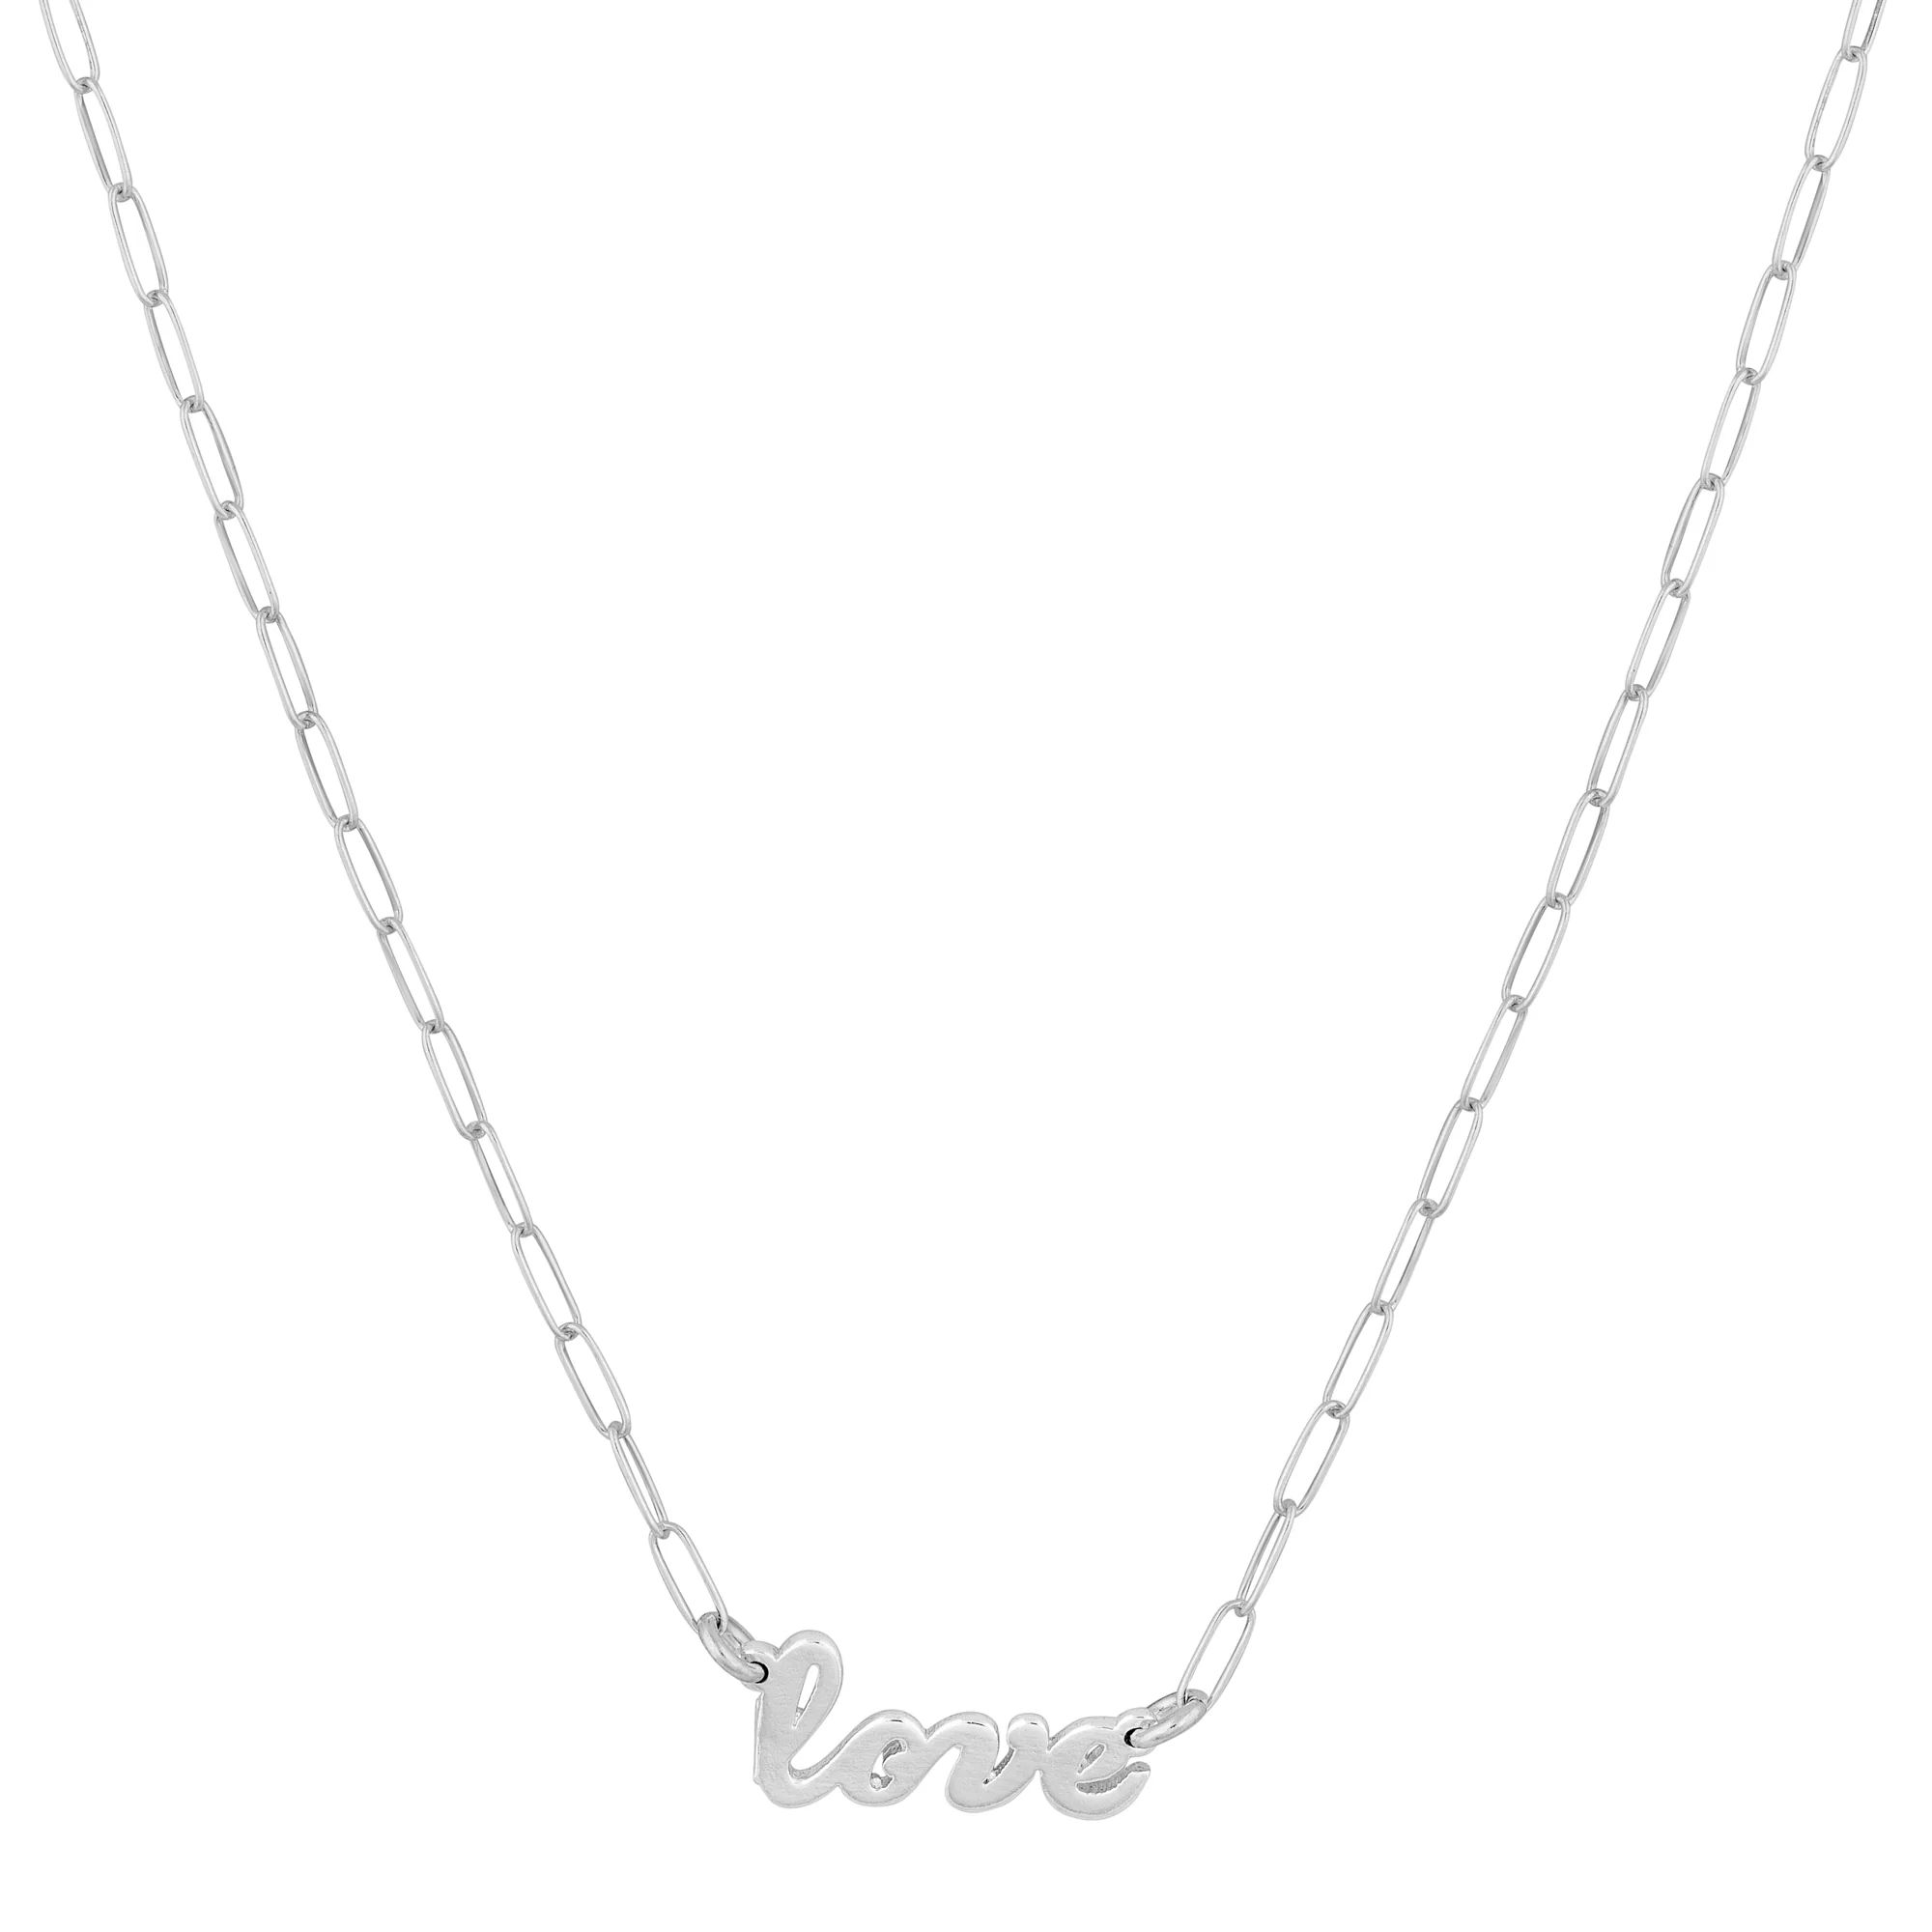 Love Necklace | Electric Picks Jewelry